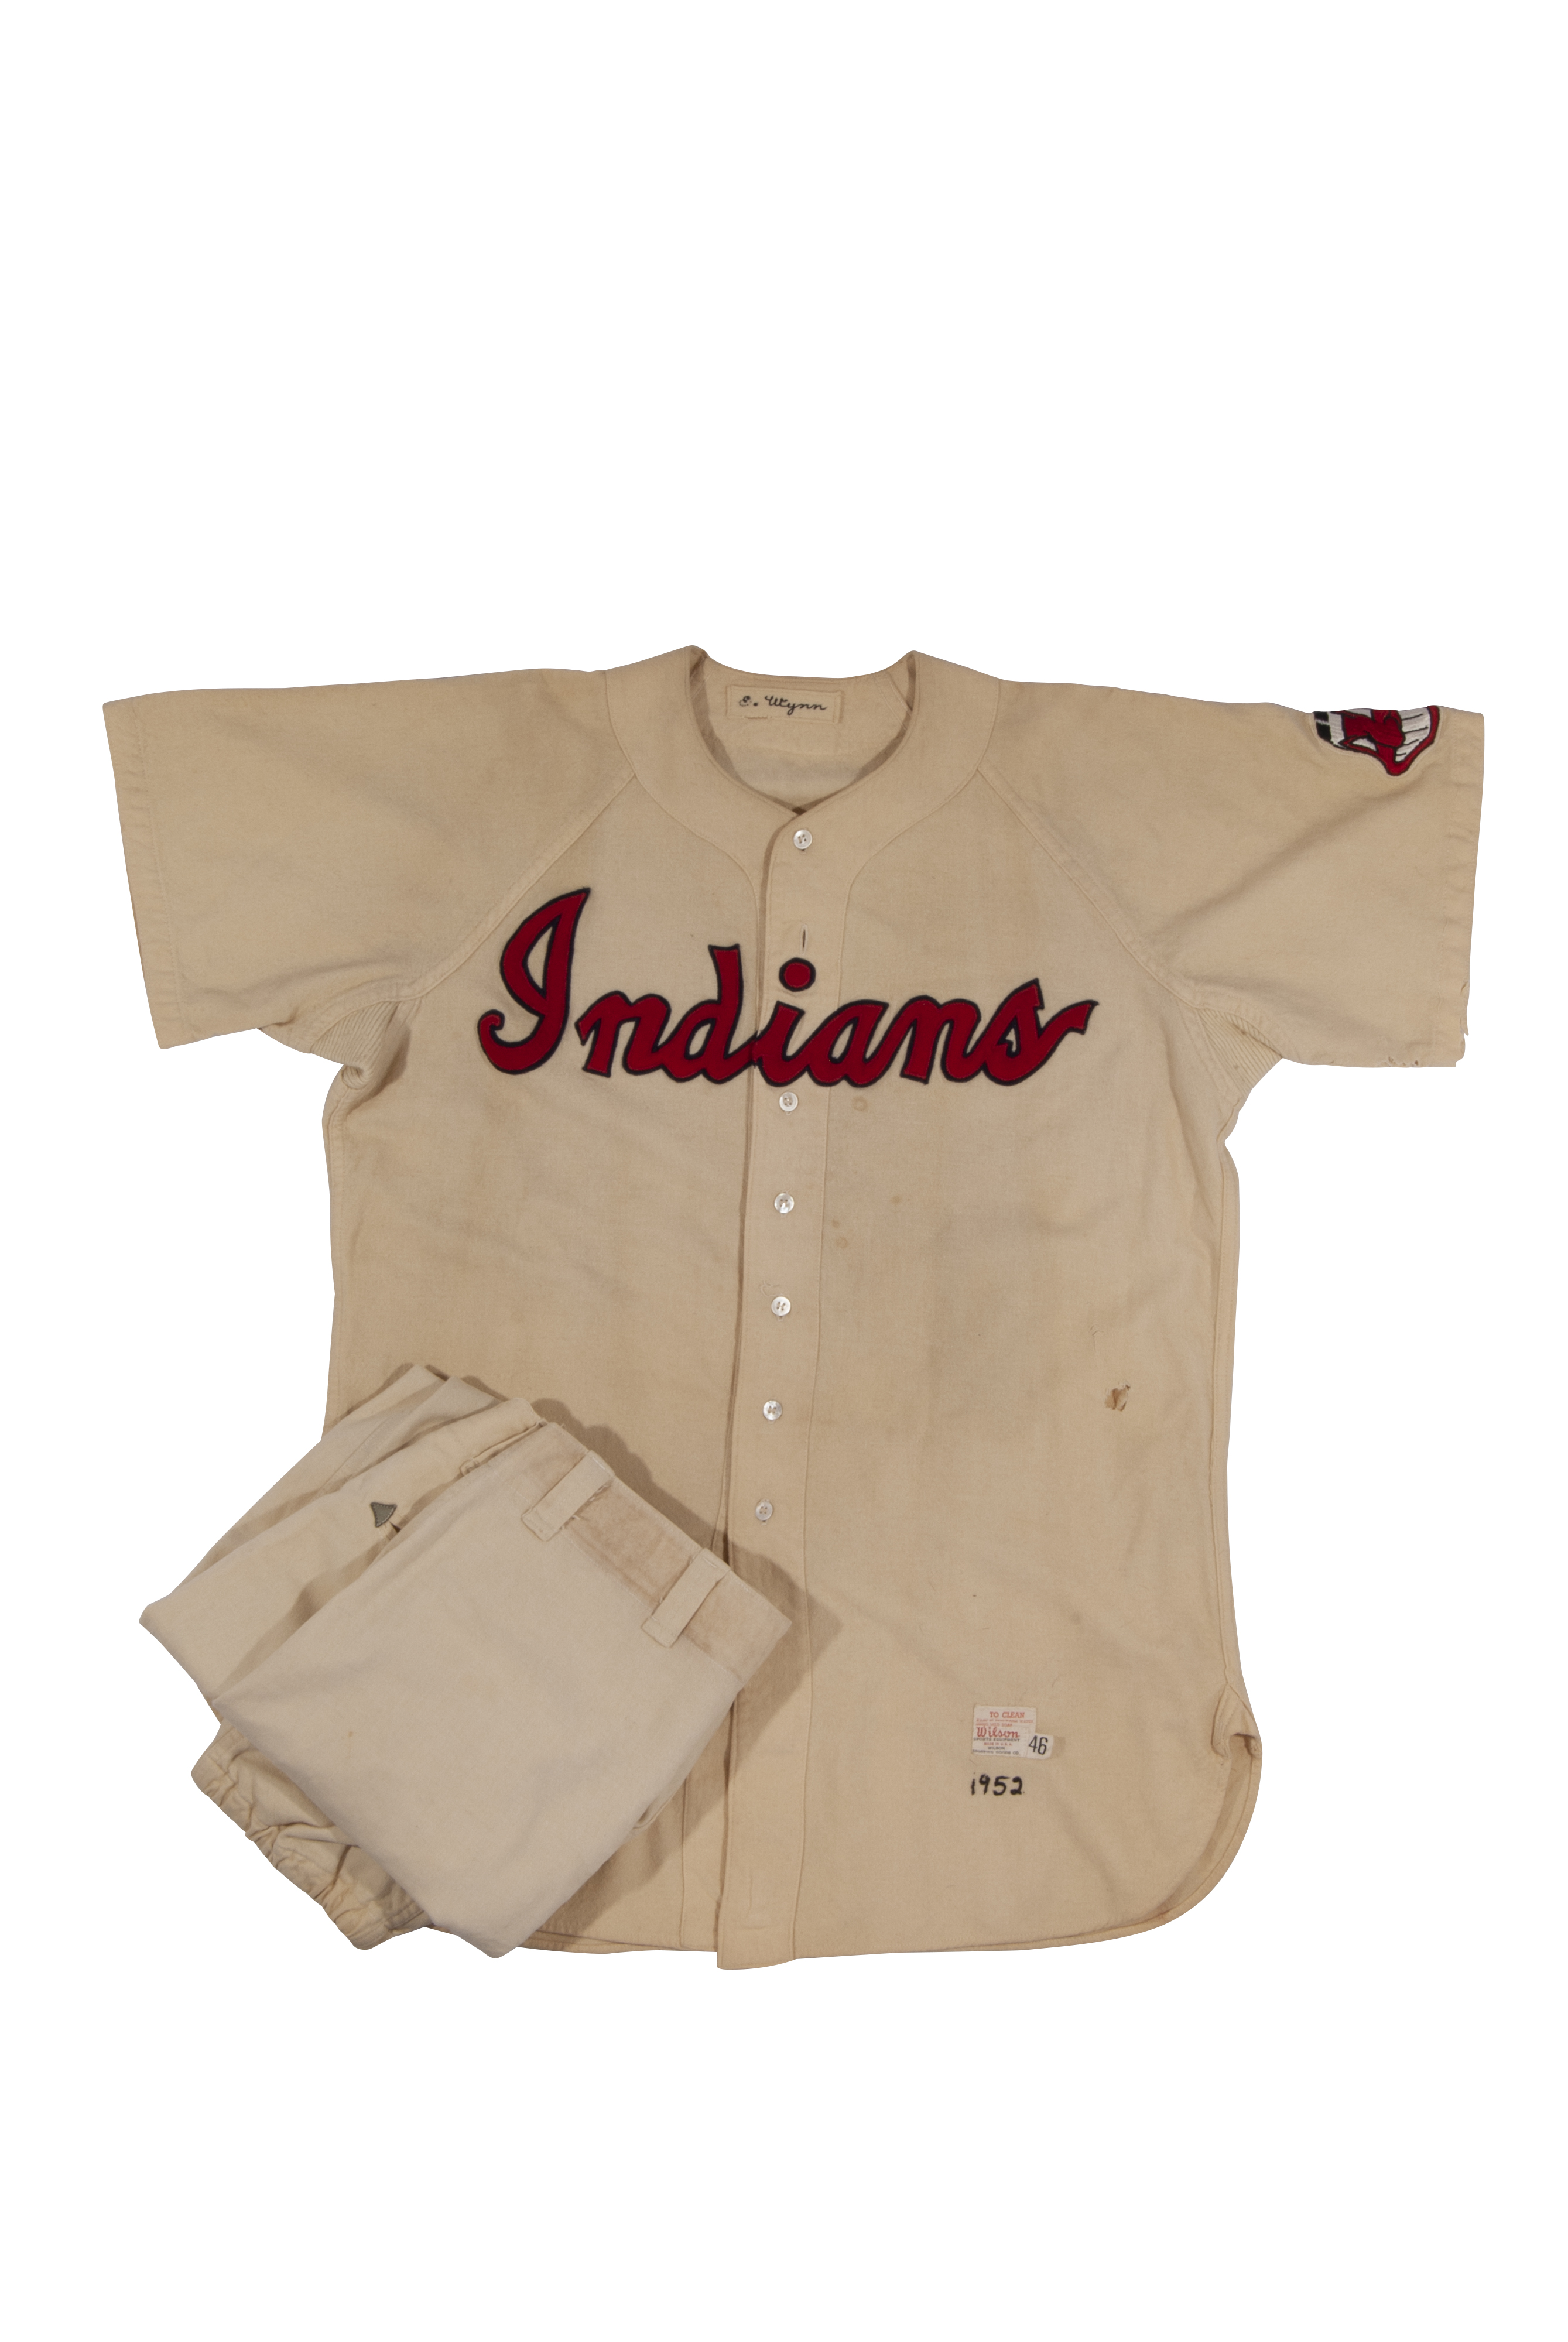 Lot Detail - 1952 EARLY WYNN CLEVELAND INDIANS GAME WORN HOME FULL UNIFORM  - TIED HIS CAREER-HIGH IN WINS (SGC EXCELLENT-SUPERIOR)